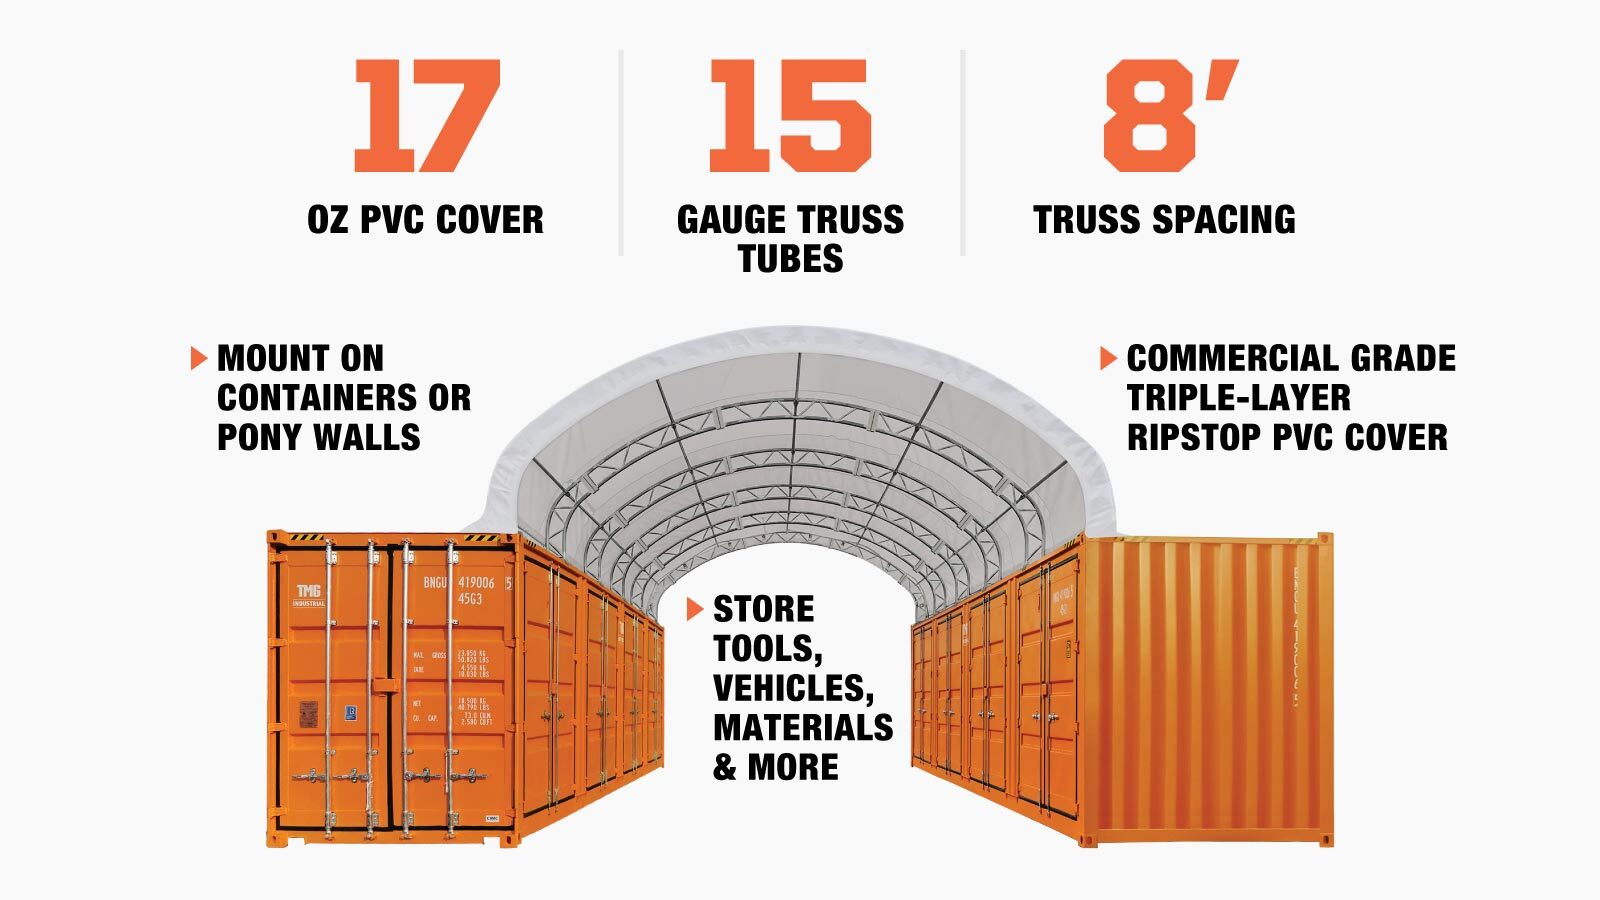 TMG Industrial Pro Series 20' x 40' Dual Truss Container Shelter with Heavy Duty 17 oz PVC Cover, TMG-DT2041CV (Previously DT2040CV)-description-image